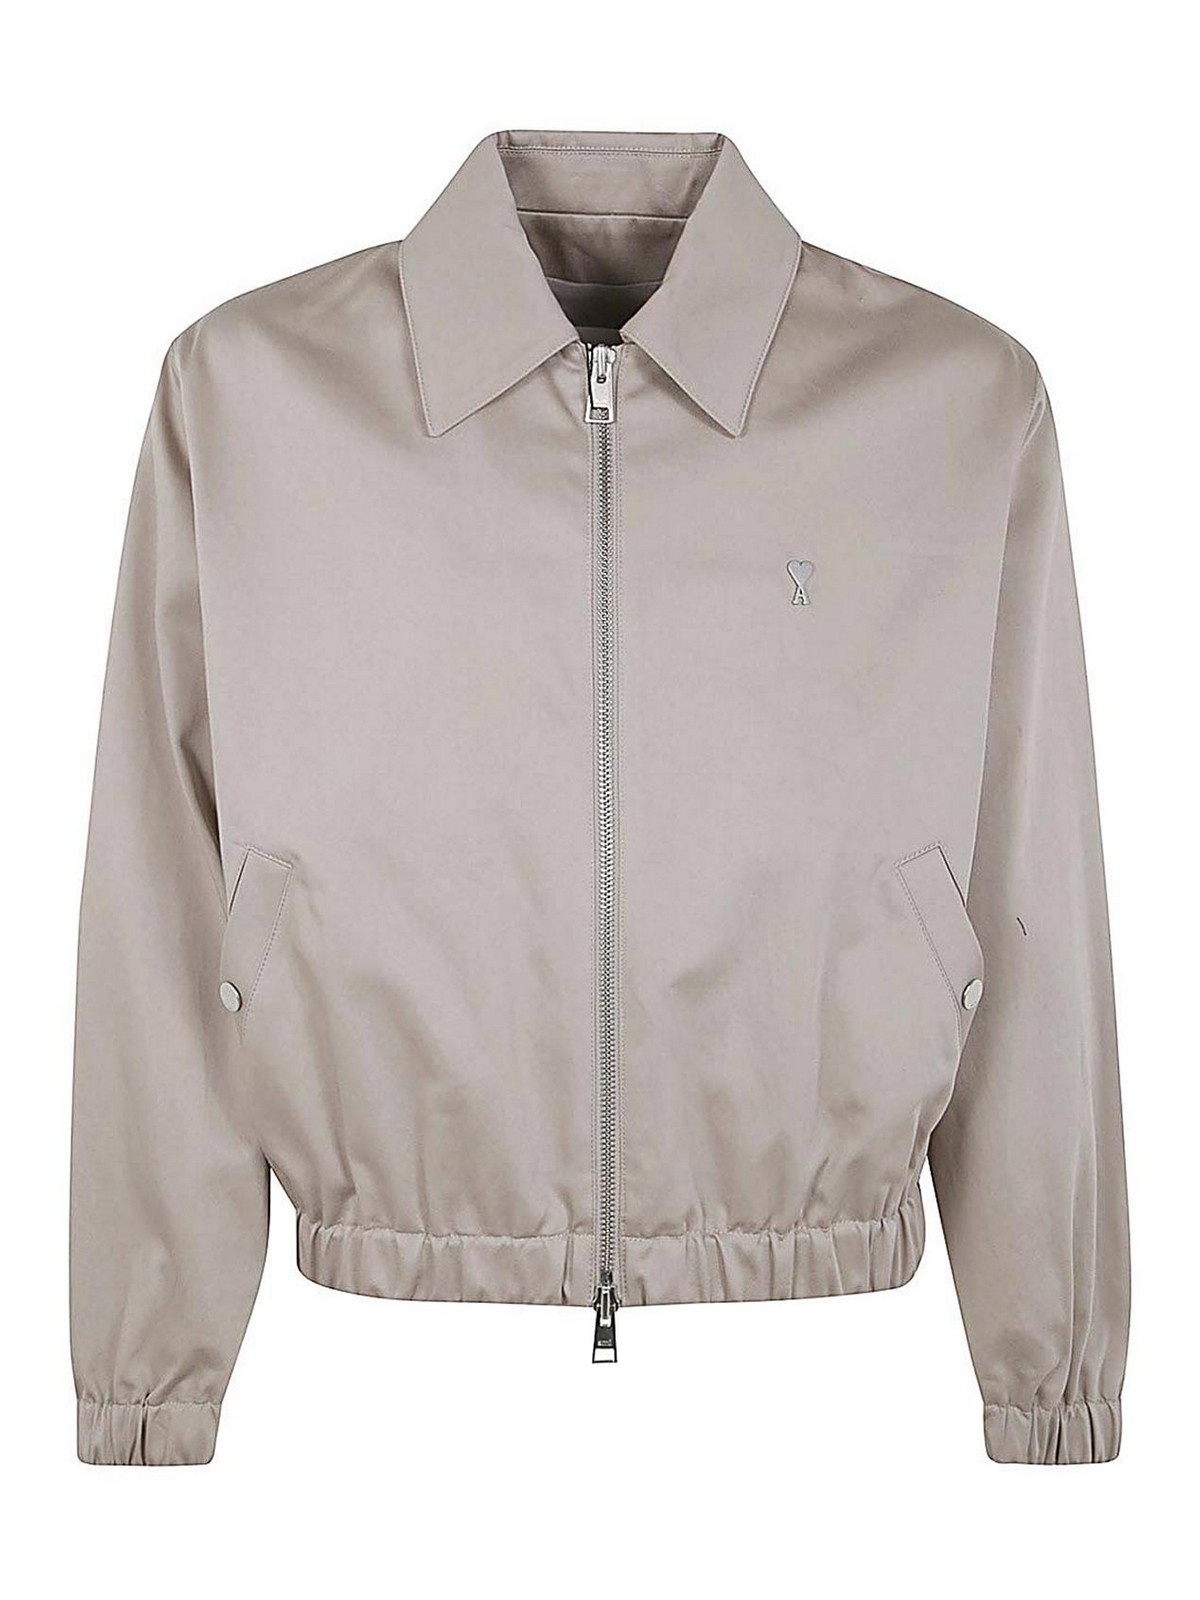 Ami Alexandre Mattiussi Adc Zipped Jacket In Brown